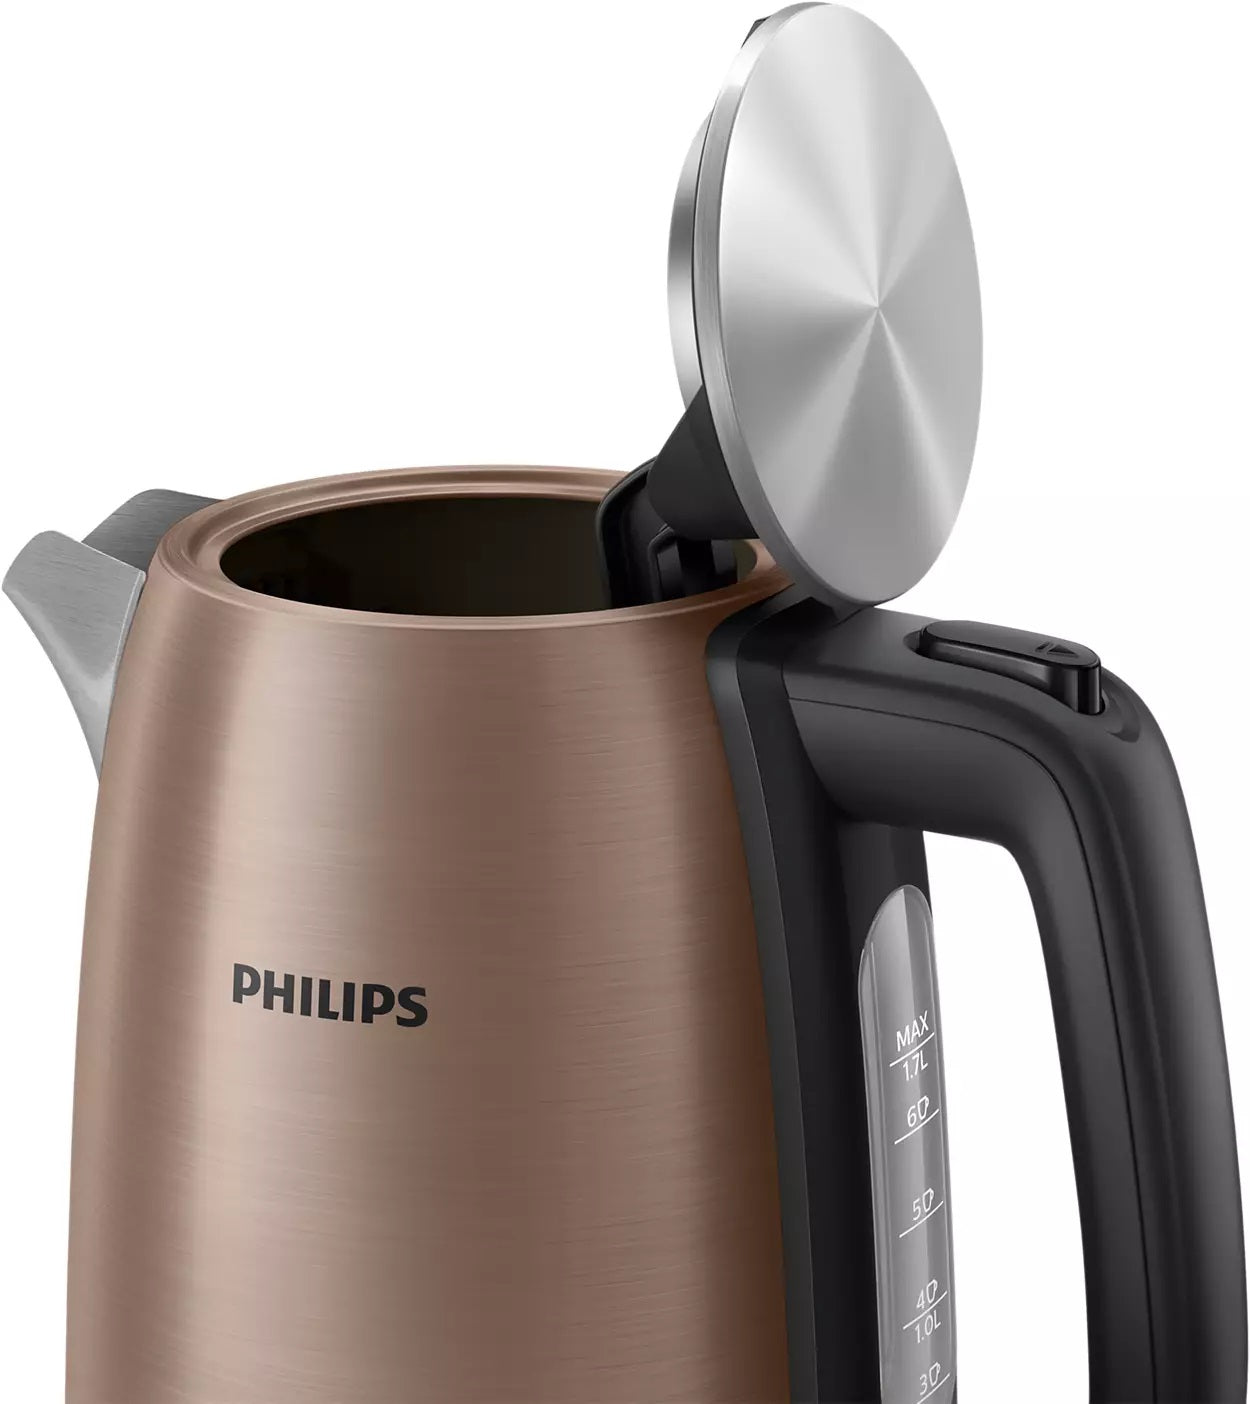 Philips Viva Collection HD9352/55 Electric Kettle